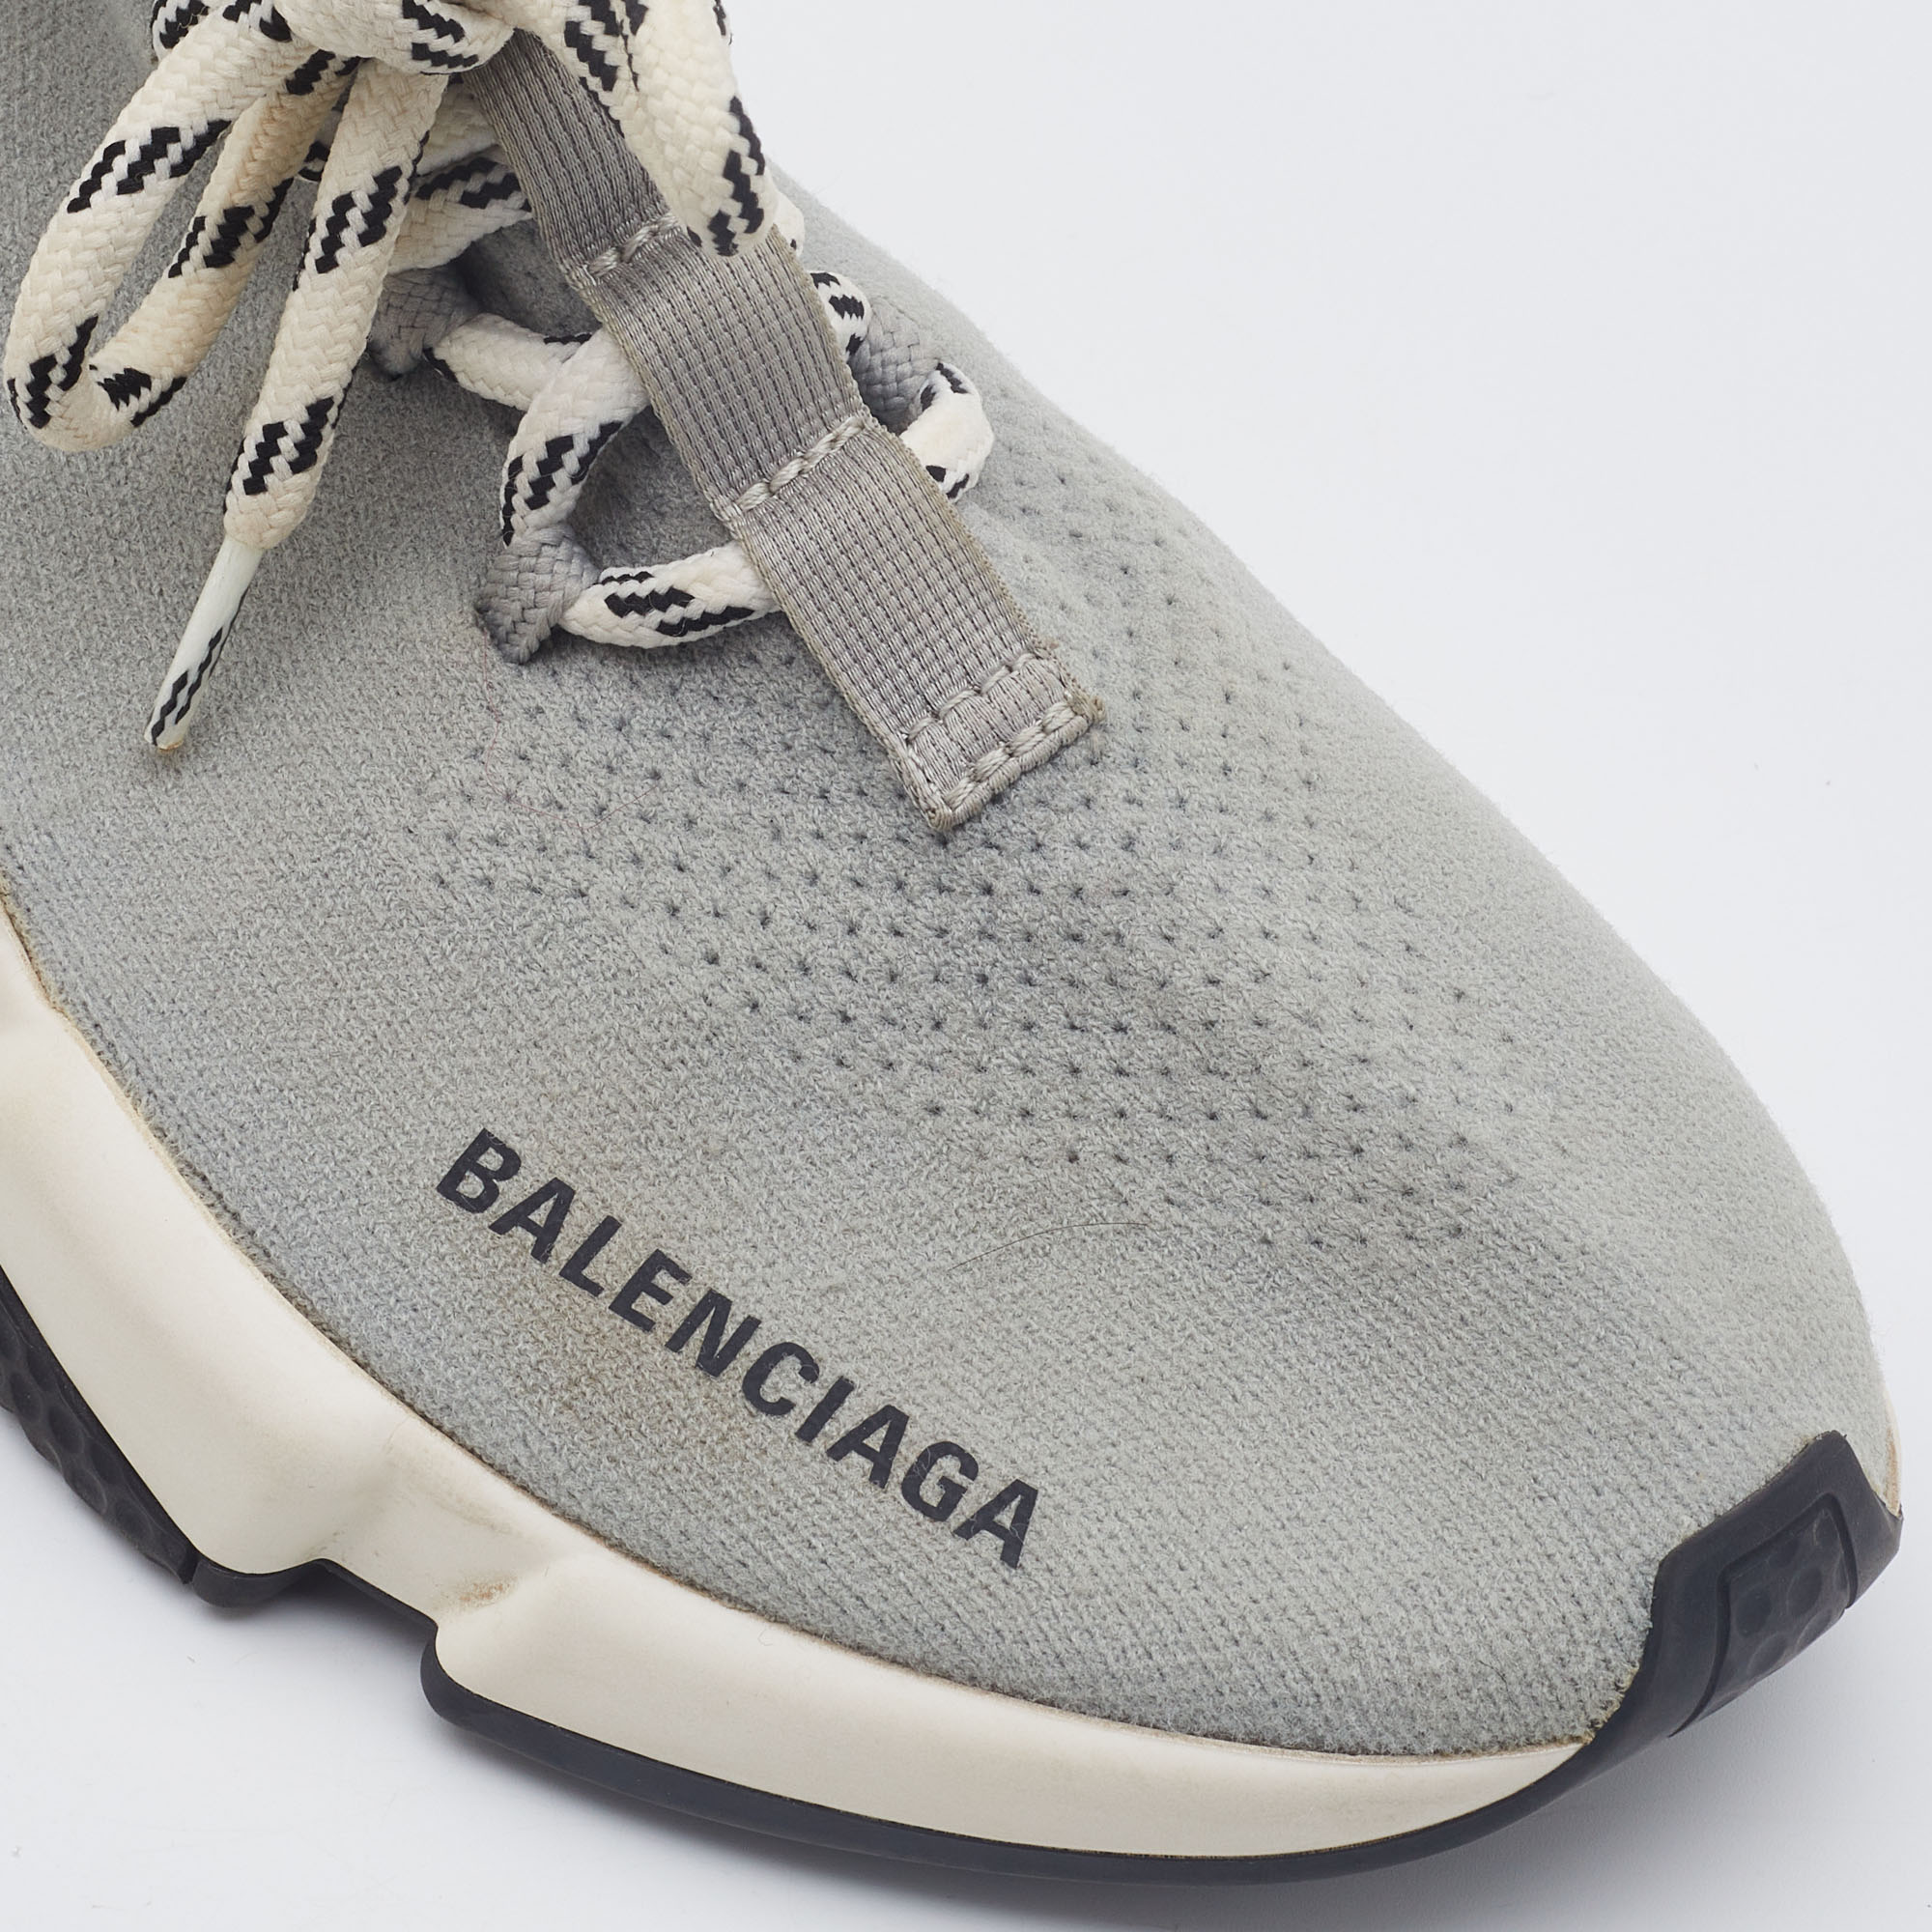 Balenciaga Grey Knit Fabric Speed Trainer Lace Up Sneakers Size 37